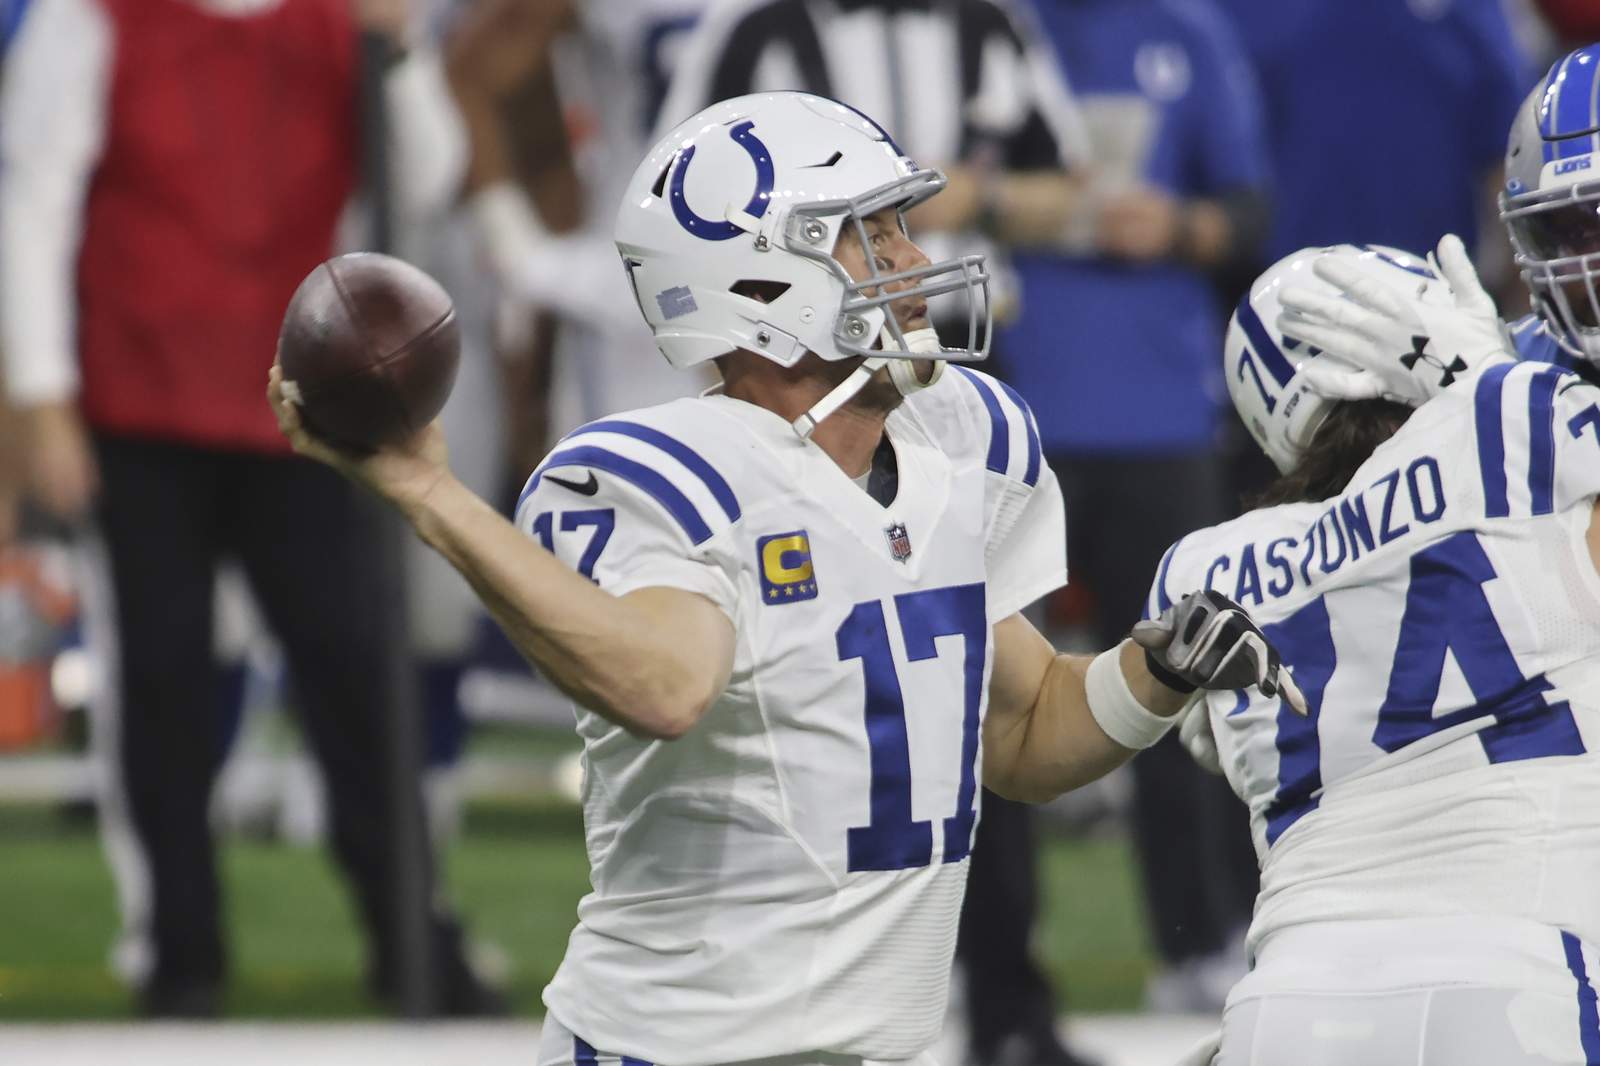 Rivers' 3 TDs in 2nd quarter help Colts beat Lions 41-21